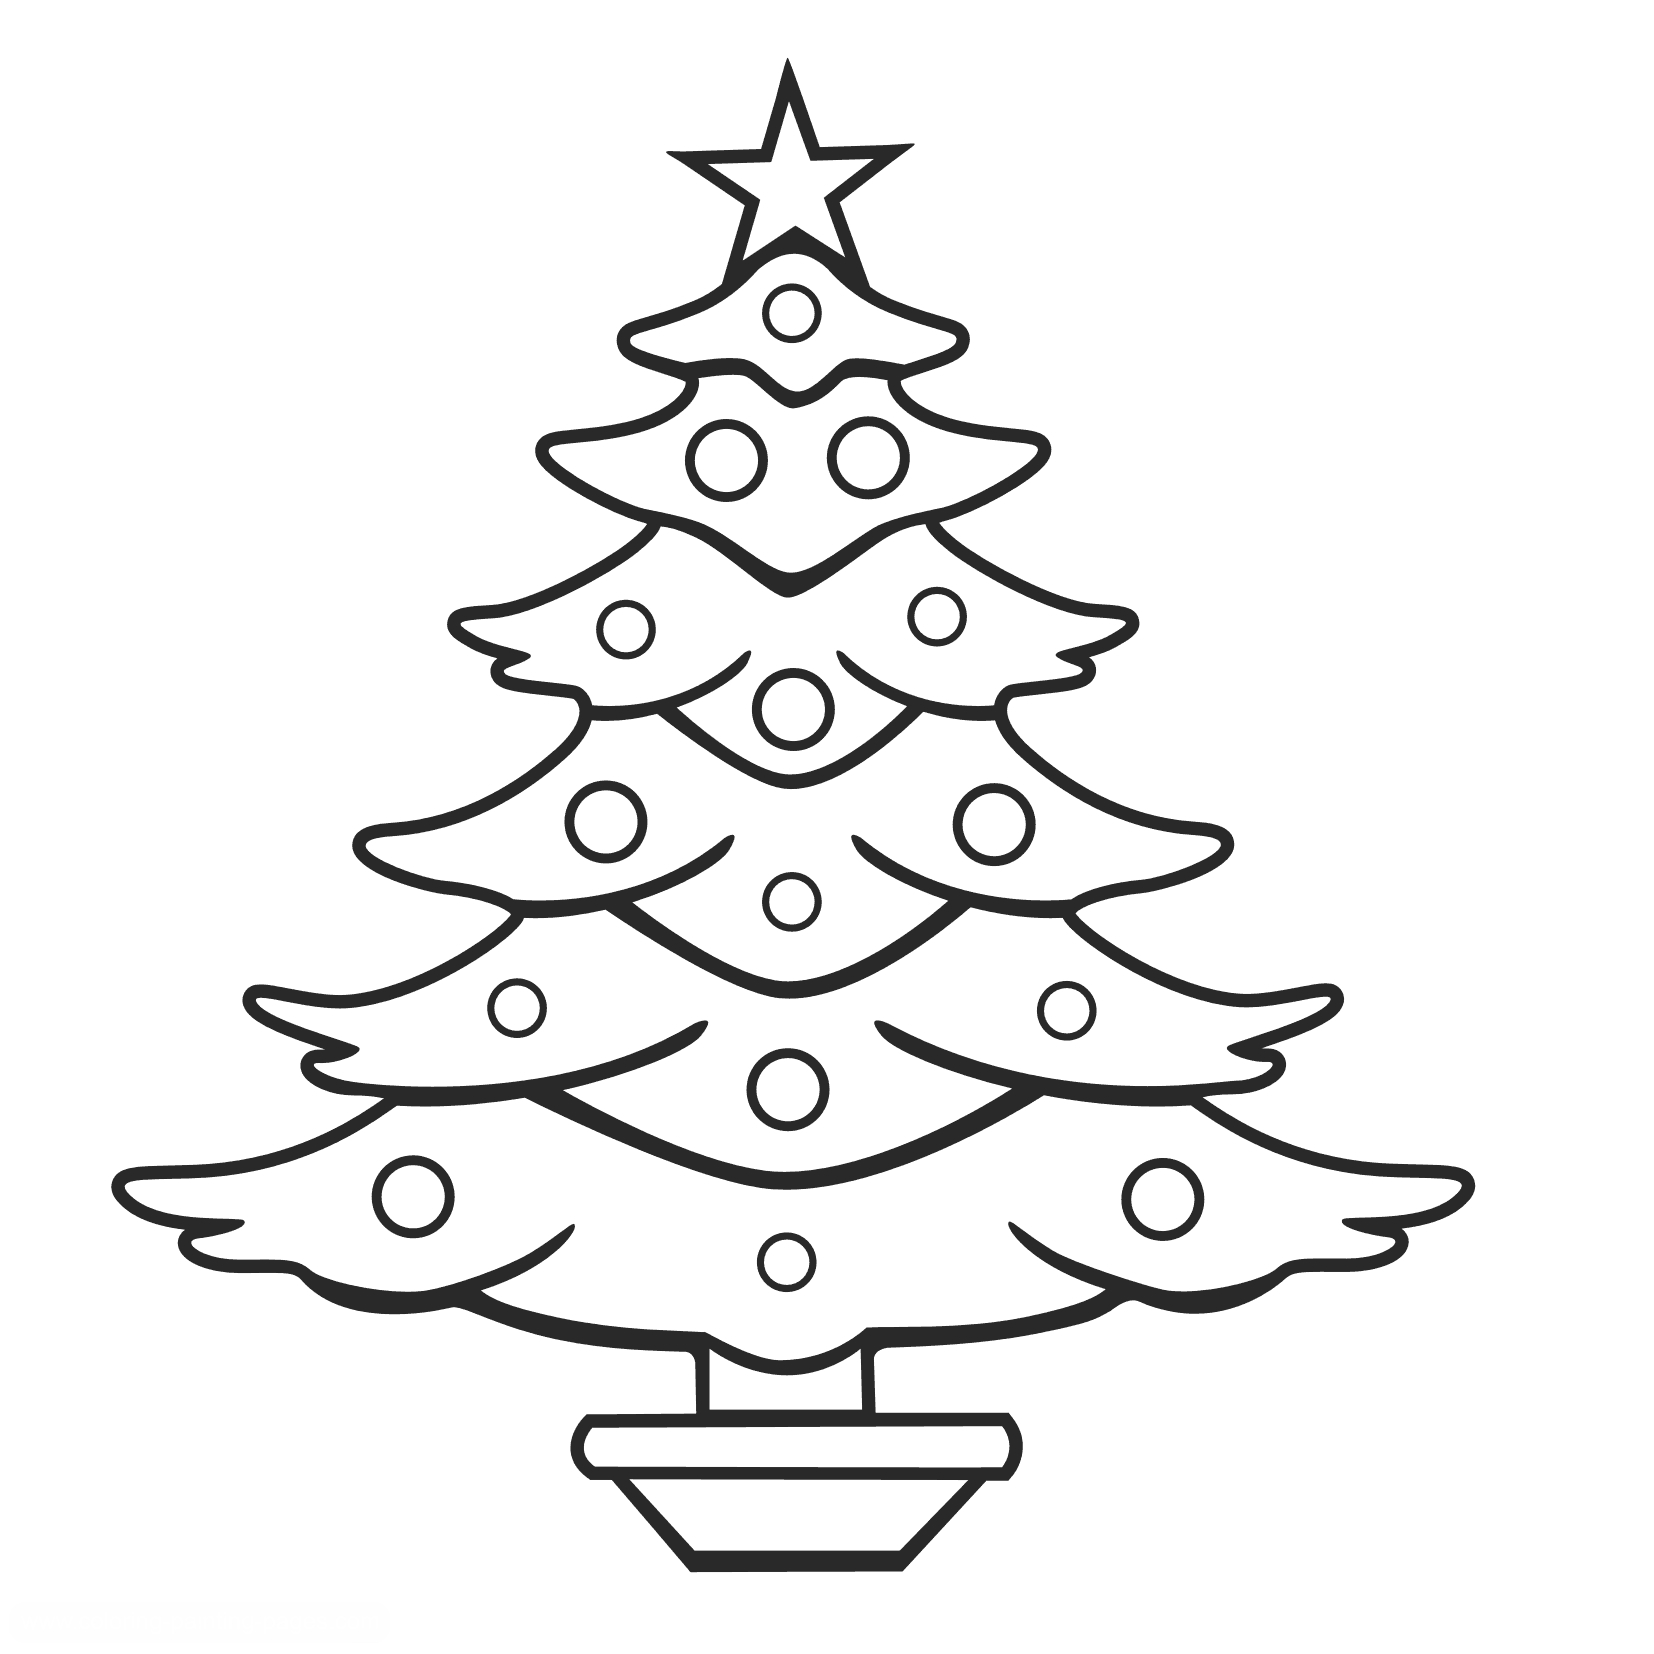     Christmas Tree Coloring Pages For Kids Free Printable   Coloring Point